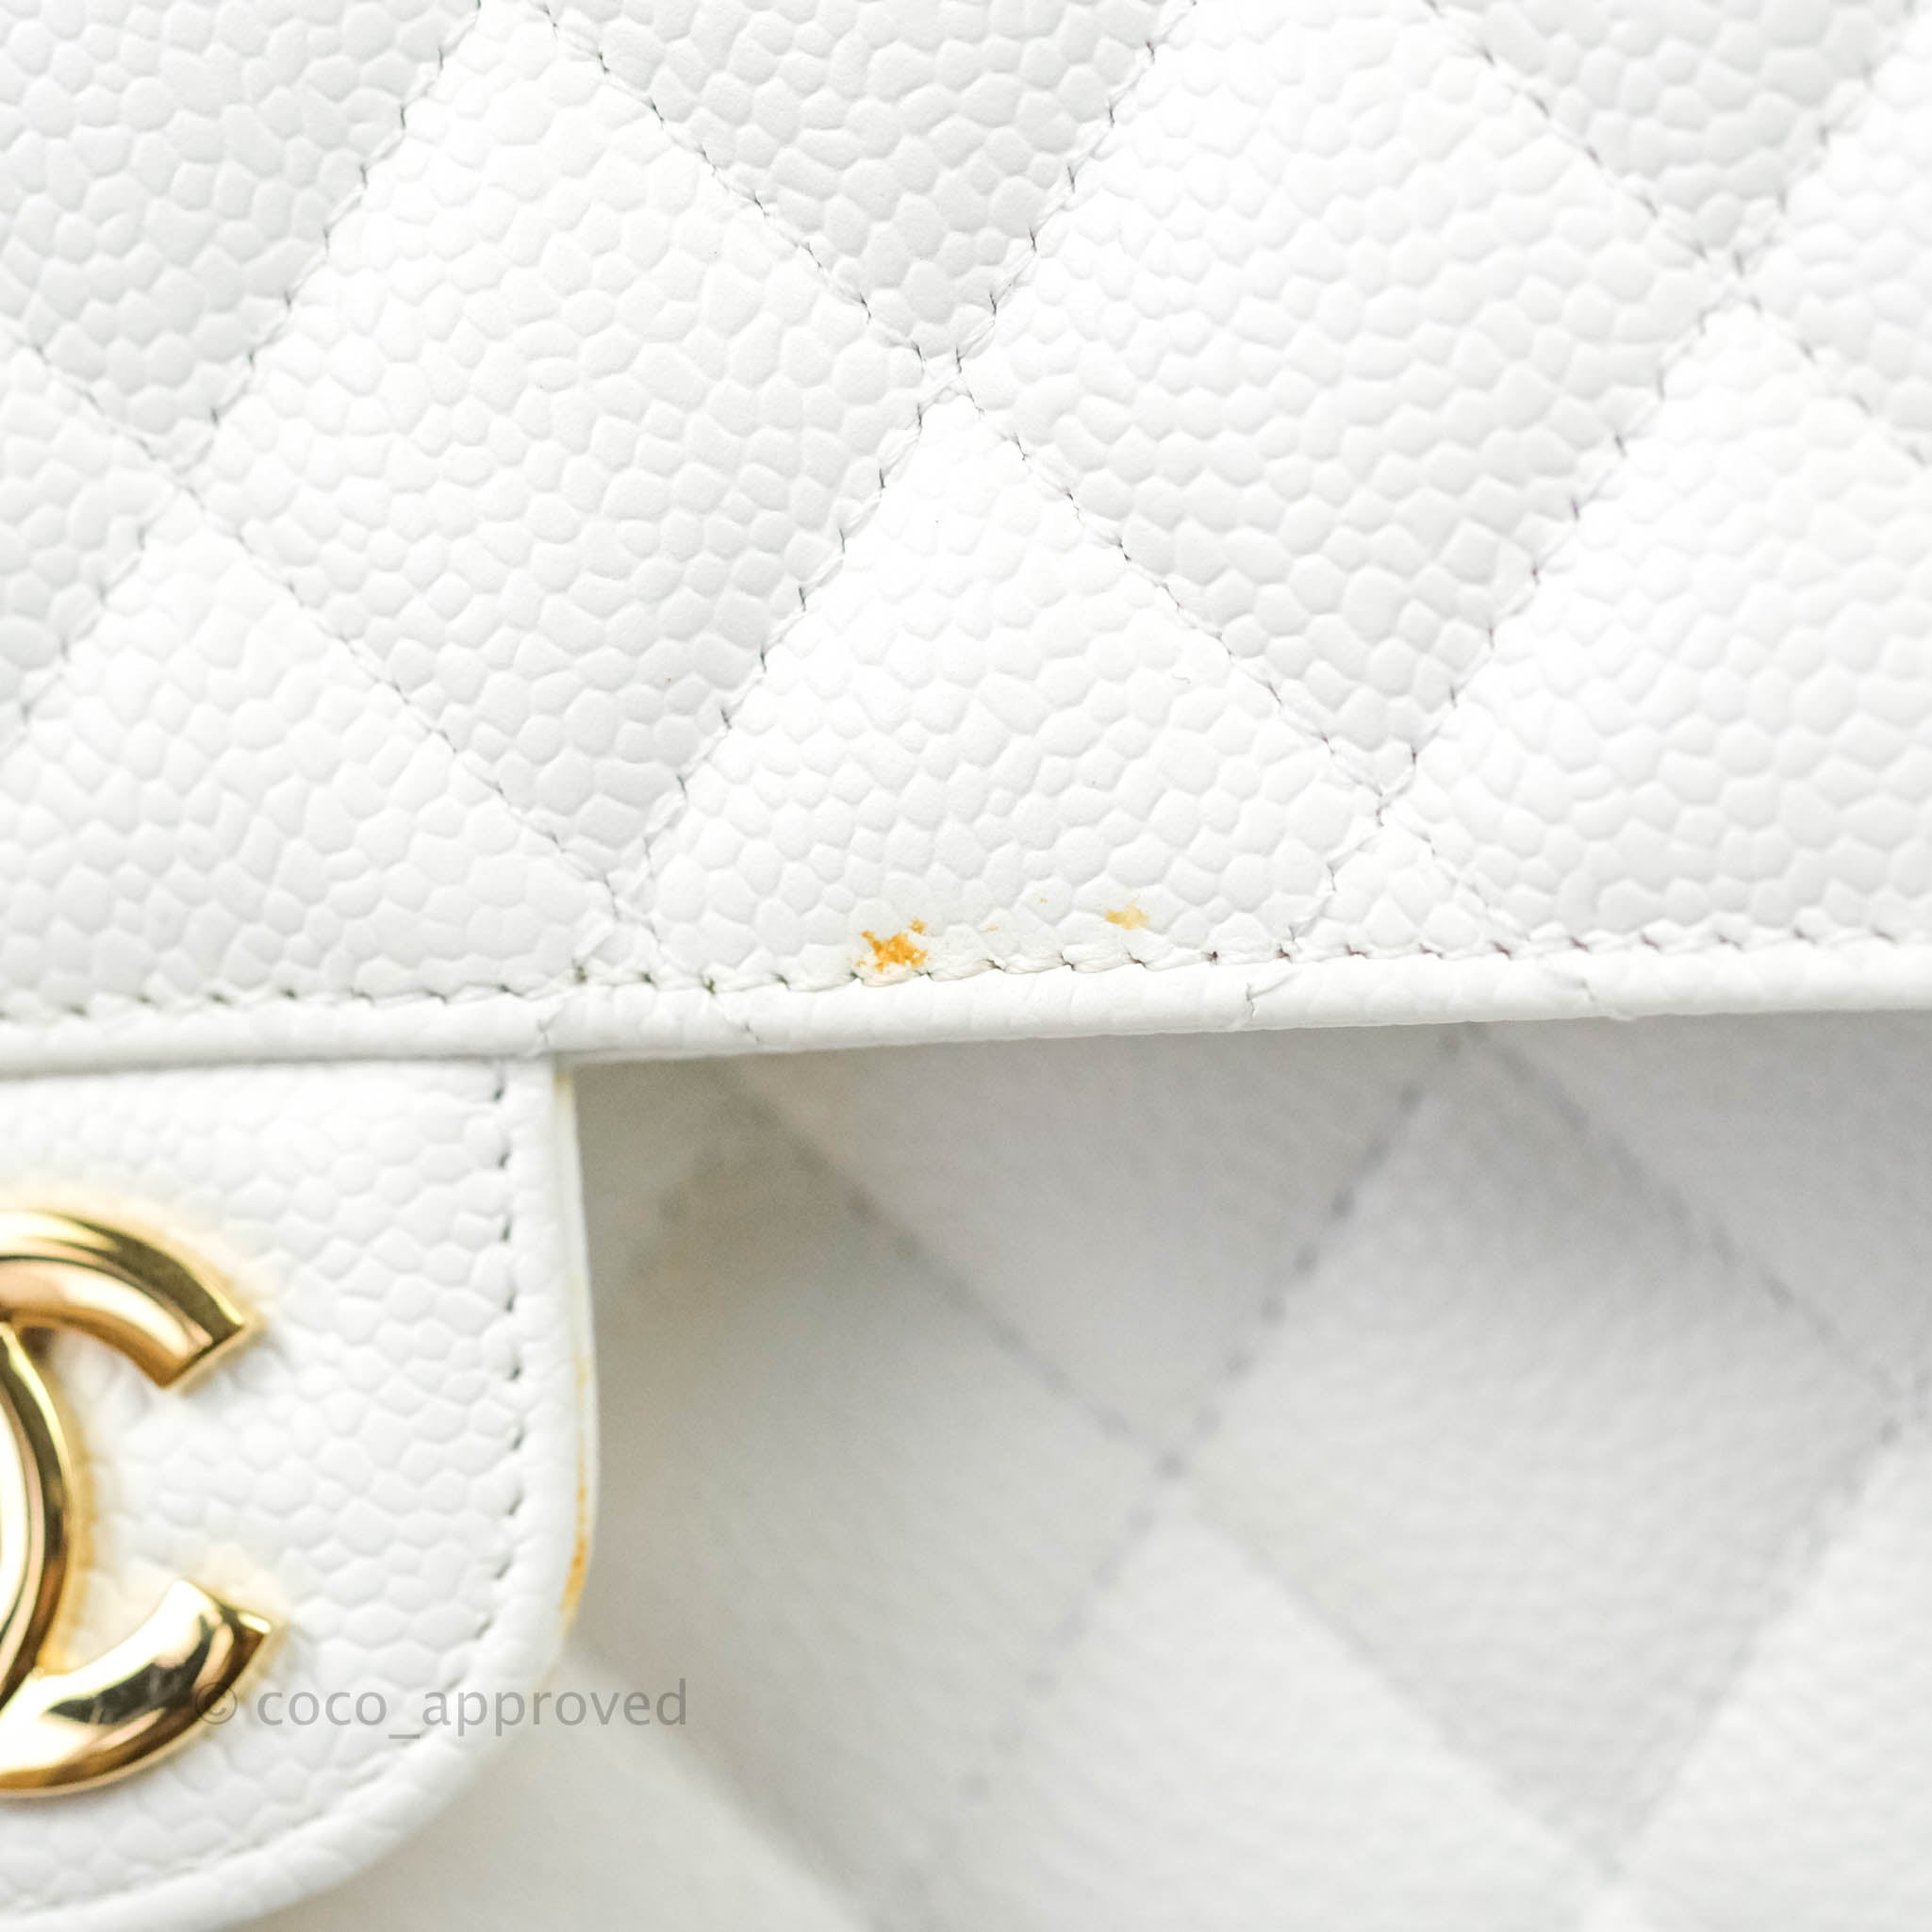 CHANEL Caviar Quilted Medium Double Flap White 1277997